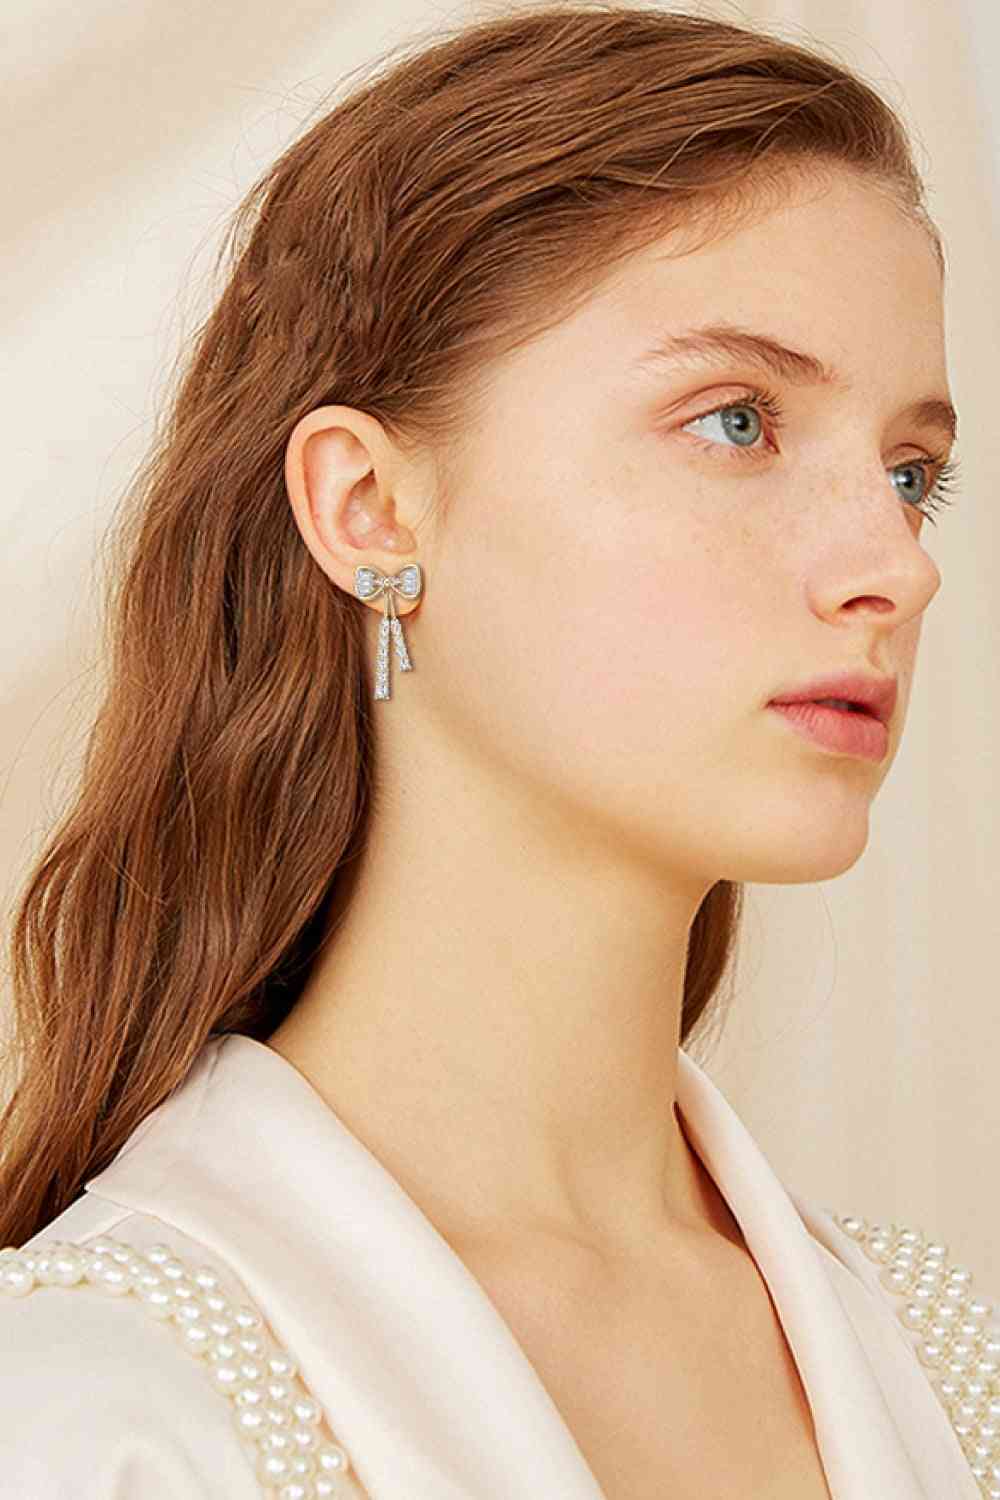 a woman wearing a white shirt and pearl earrings